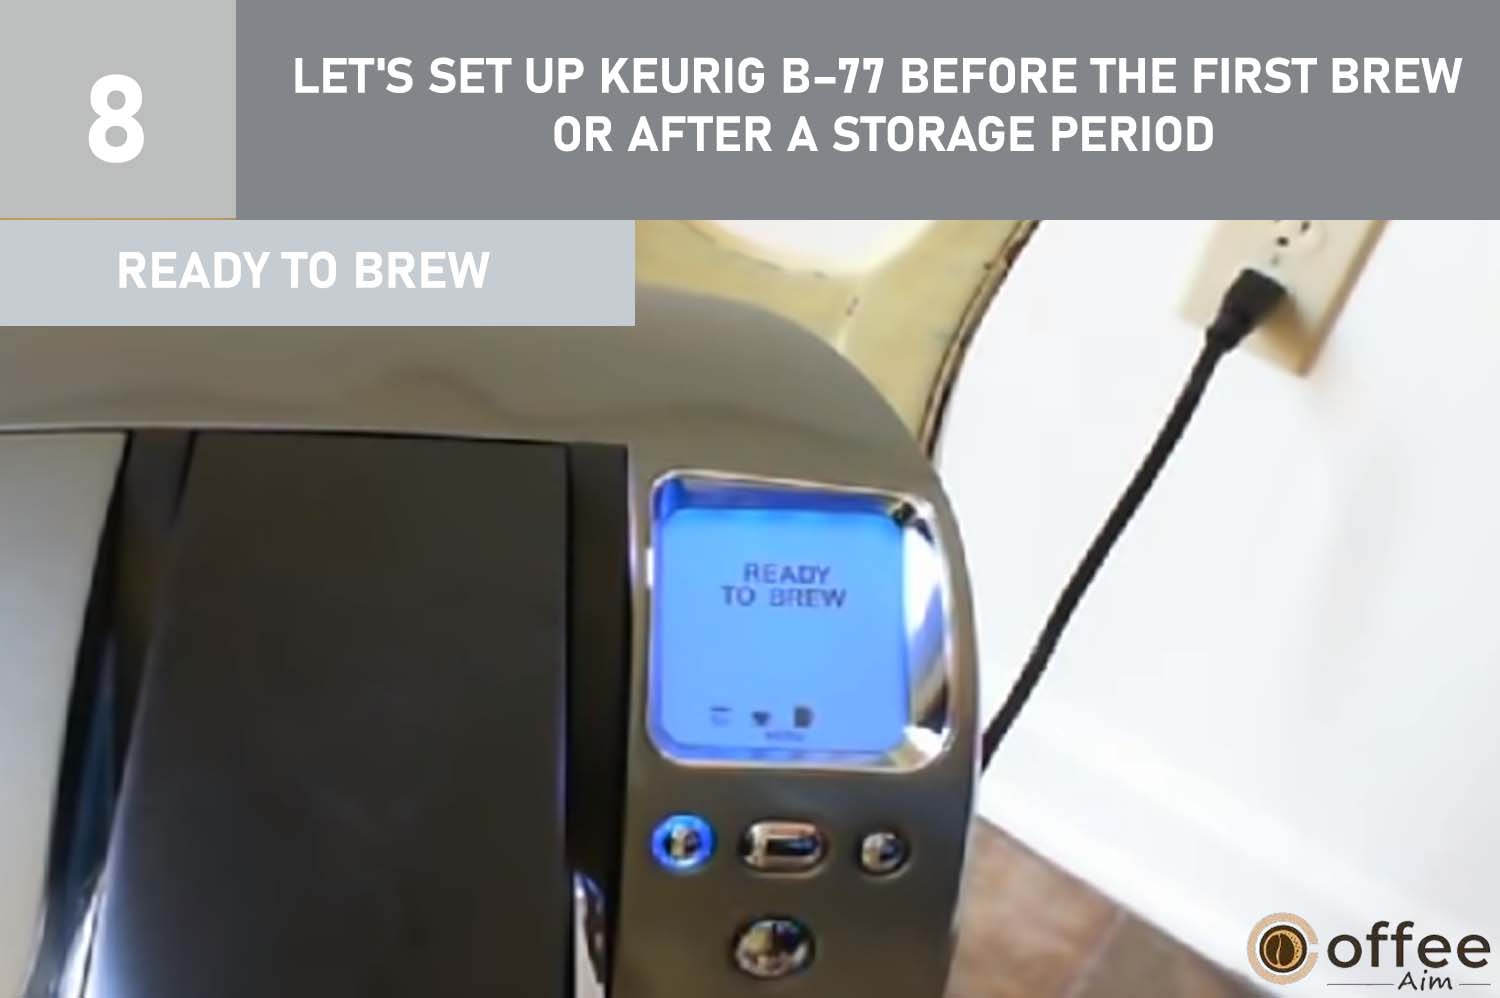 The Brewer automatically fills the internal tank with water and heats it in just 4 minutes. The LCD displays "NOT READY" during heating and "READY TO BREW" when water is heated, with the Brew button flashing.